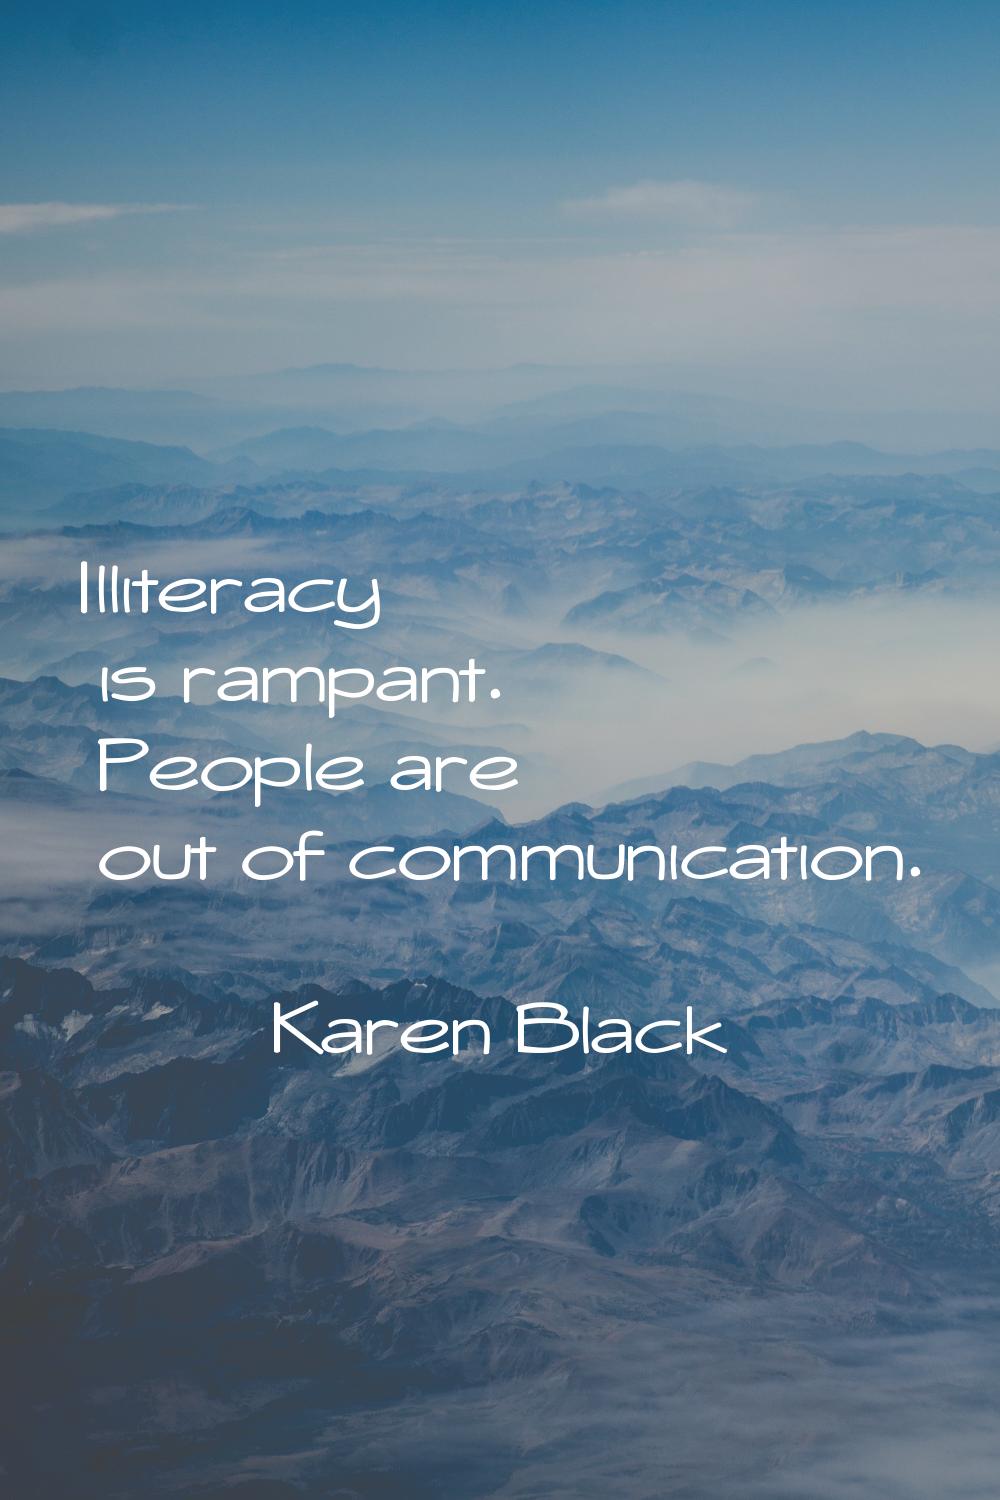 Illiteracy is rampant. People are out of communication.